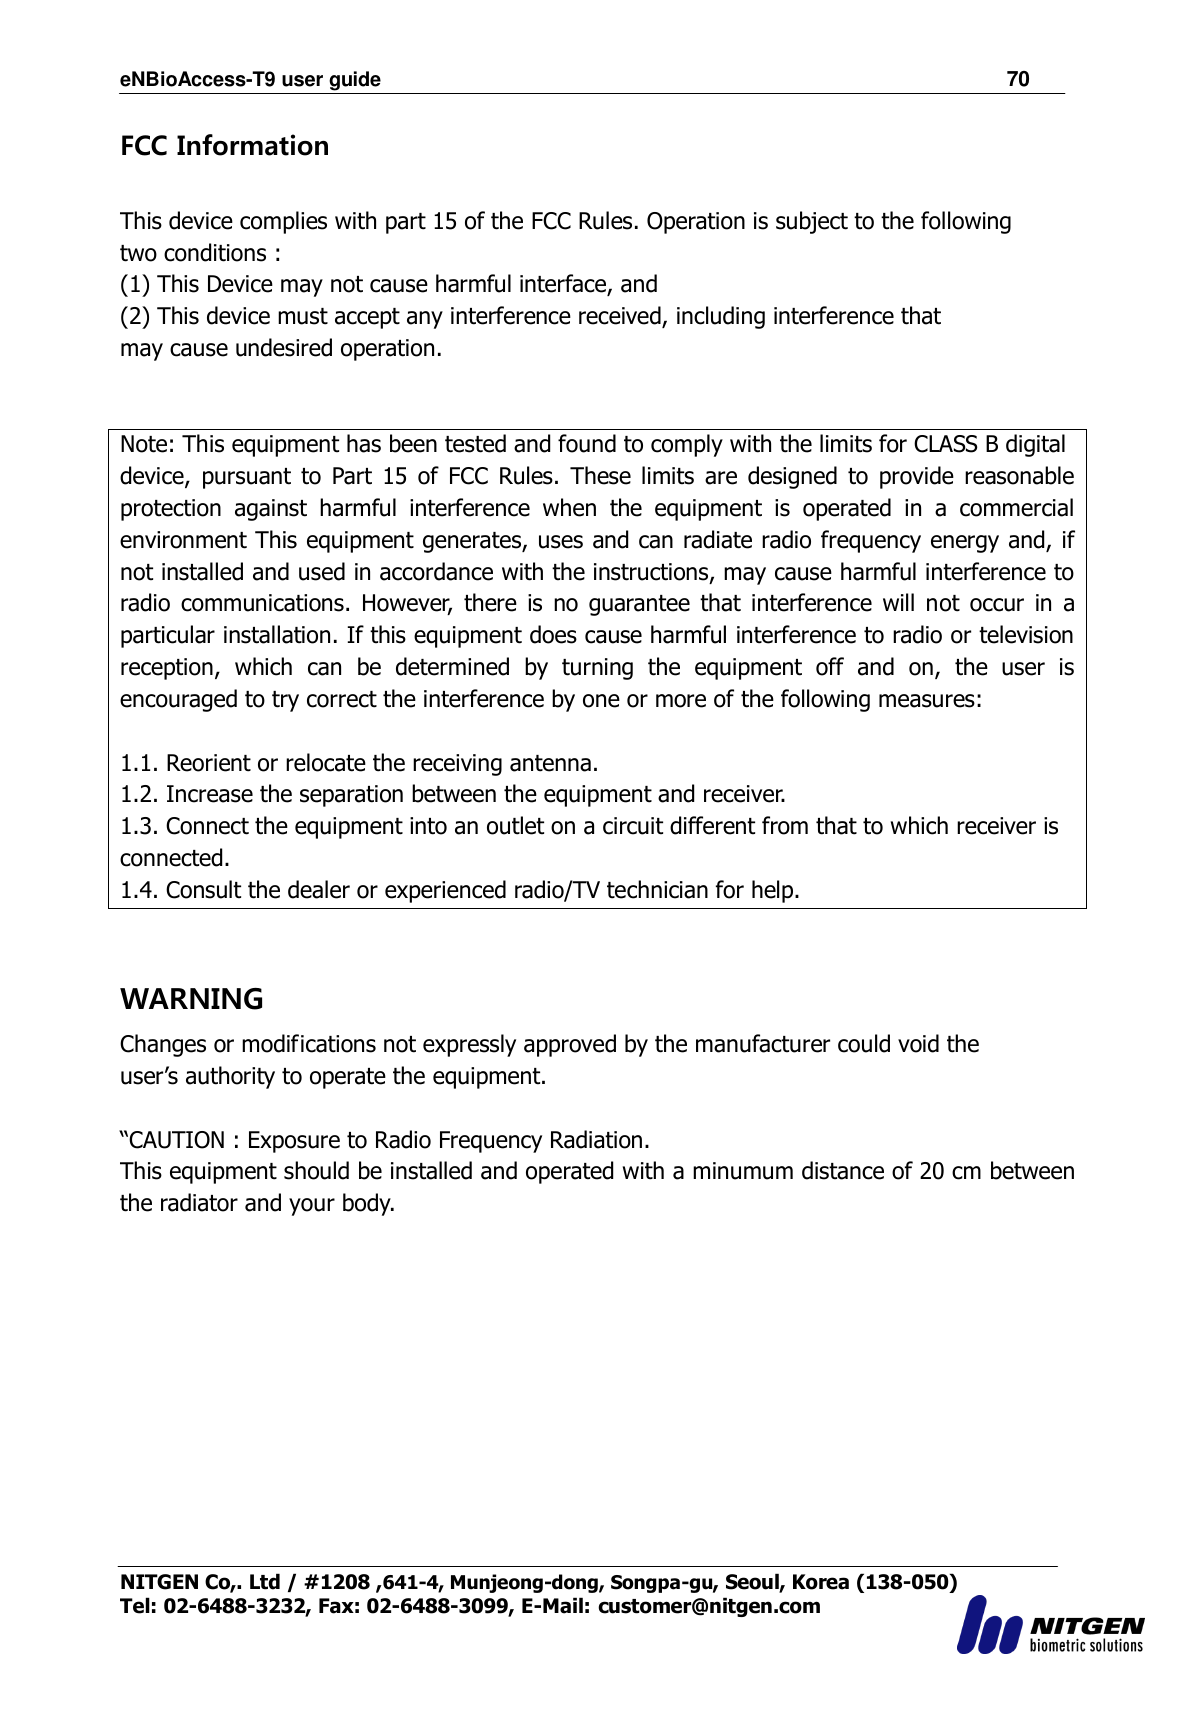 eNBioAccess-T9 user guide                                                               70 NITGEN Co,. Ltd / #1208 ,641-4, Munjeong-dong, Songpa-gu, Seoul, Korea (138-050) Tel: 02-6488-3232, Fax: 02-6488-3099, E-Mail: customer@nitgen.com  FCC Information  This device complies with part 15 of the FCC Rules. Operation is subject to the following two conditions : (1) This Device may not cause harmful interface, and (2) This device must accept any interference received, including interference that may cause undesired operation.   Note: This equipment has been tested and found to comply with the limits for CLASS B digital device,  pursuant  to  Part  15  of  FCC  Rules.  These  limits  are  designed  to  provide  reasonable protection  against  harmful  interference  when  the  equipment  is  operated  in  a  commercial environment This equipment generates, uses and can radiate radio frequency energy and, if not installed and used in accordance with the instructions, may cause harmful interference to radio  communications.  However,  there  is  no  guarantee  that  interference  will  not  occur  in  a particular installation. If this equipment does cause harmful interference to radio or television reception,  which  can  be  determined  by  turning  the  equipment  off  and  on,  the  user  is encouraged to try correct the interference by one or more of the following measures:  1.1. Reorient or relocate the receiving antenna. 1.2. Increase the separation between the equipment and receiver. 1.3. Connect the equipment into an outlet on a circuit different from that to which receiver is connected. 1.4. Consult the dealer or experienced radio/TV technician for help.   WARNING Changes or modifications not expressly approved by the manufacturer could void the user‟s authority to operate the equipment.  “CAUTION : Exposure to Radio Frequency Radiation. This equipment should be installed and operated with a minumum distance of 20 cm between the radiator and your body.    